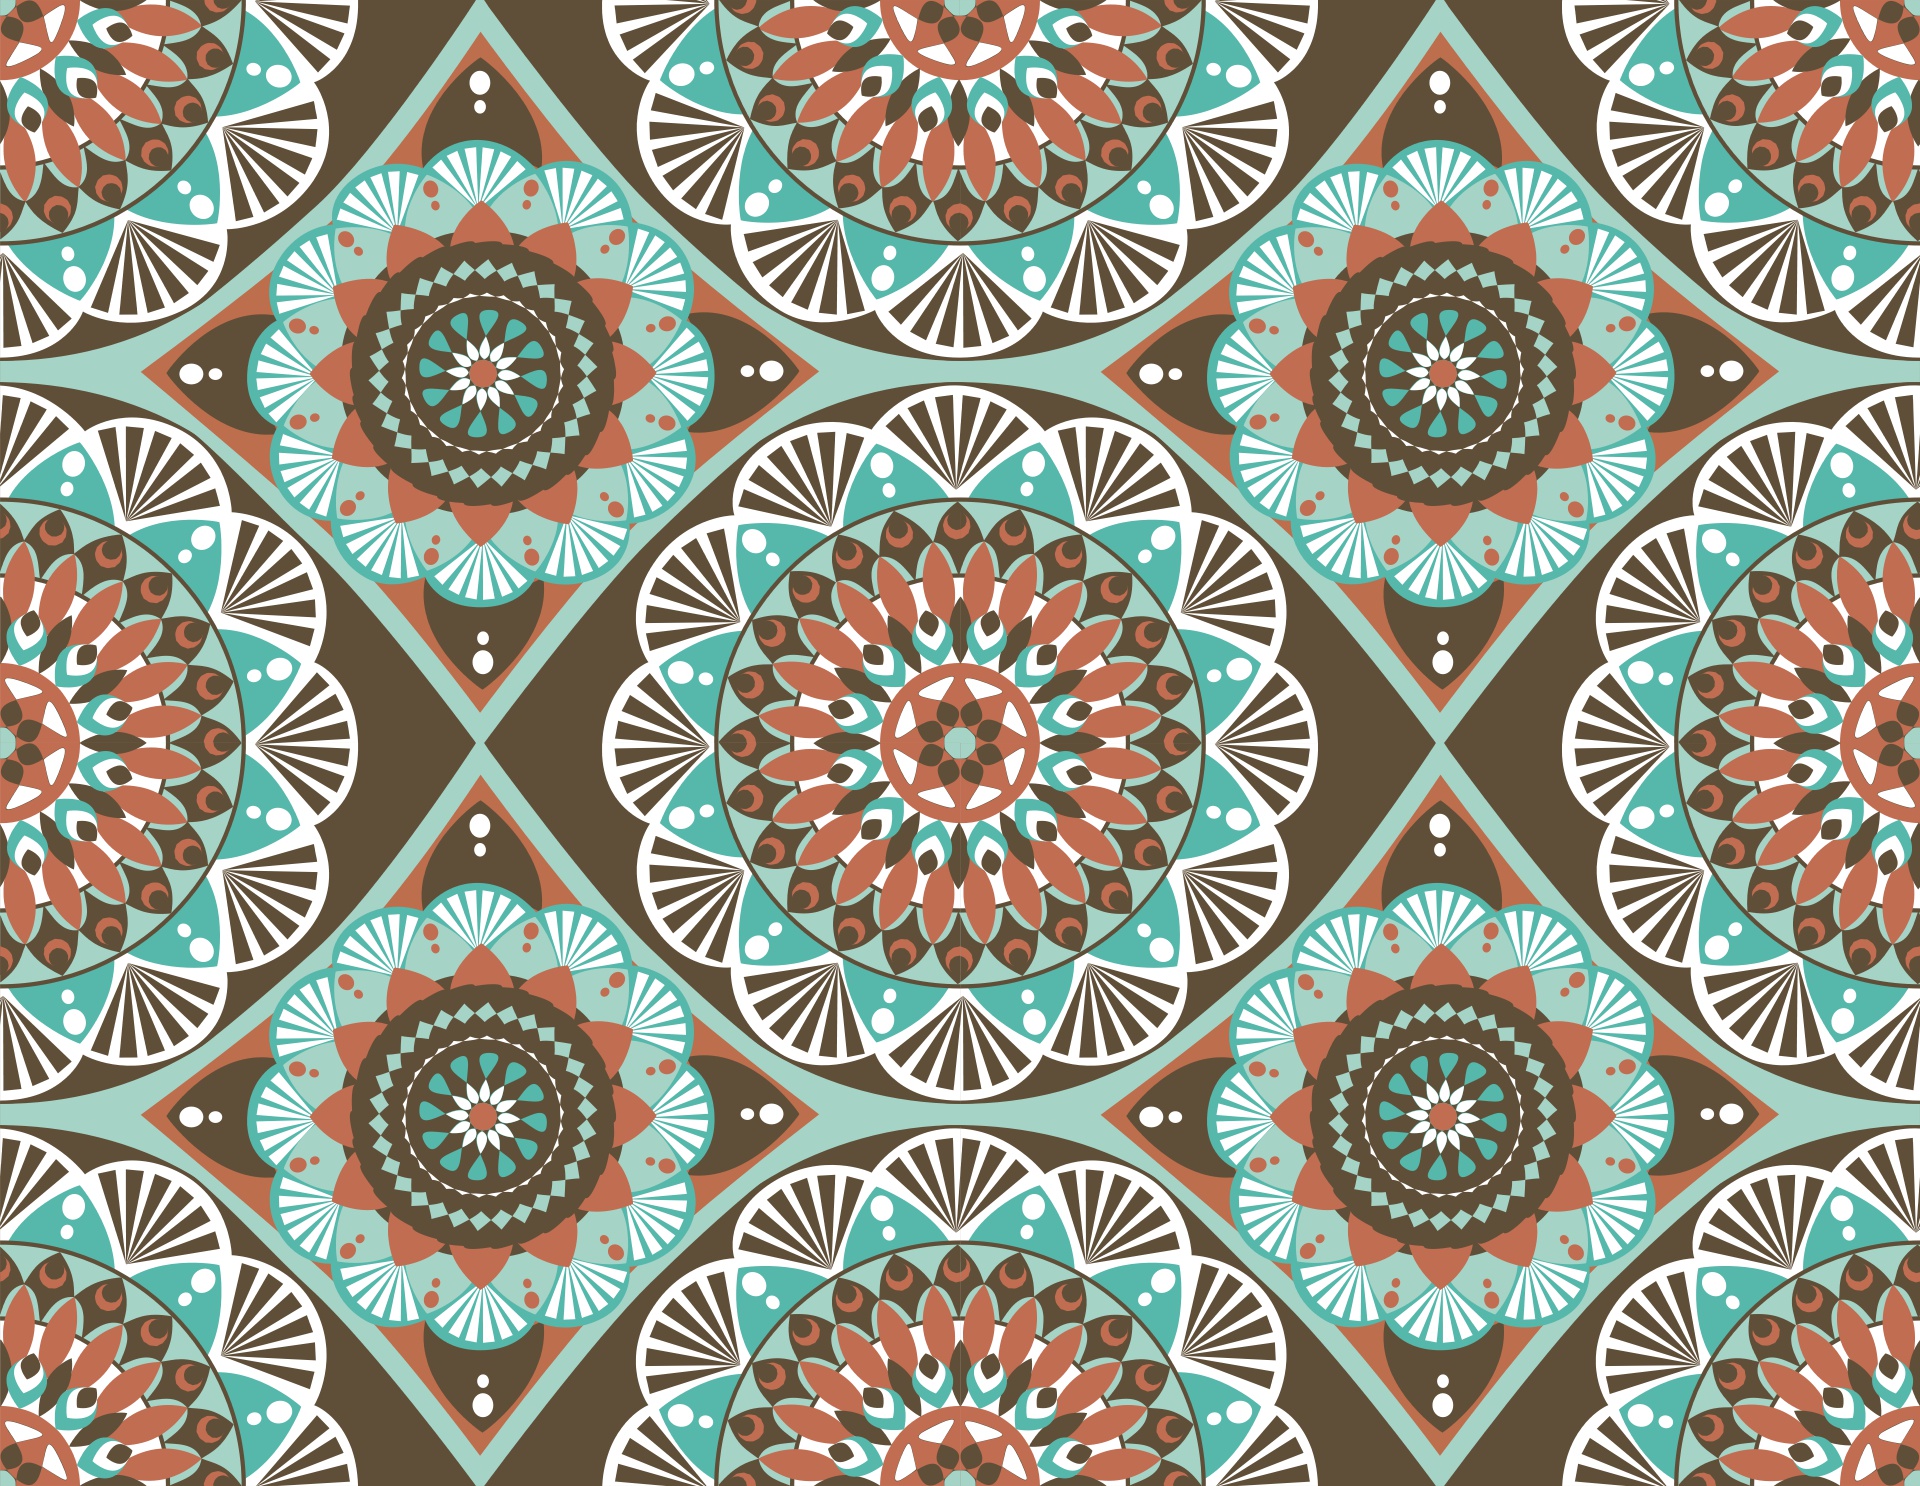 Abstract Pattern HD Wallpaper | Background Image